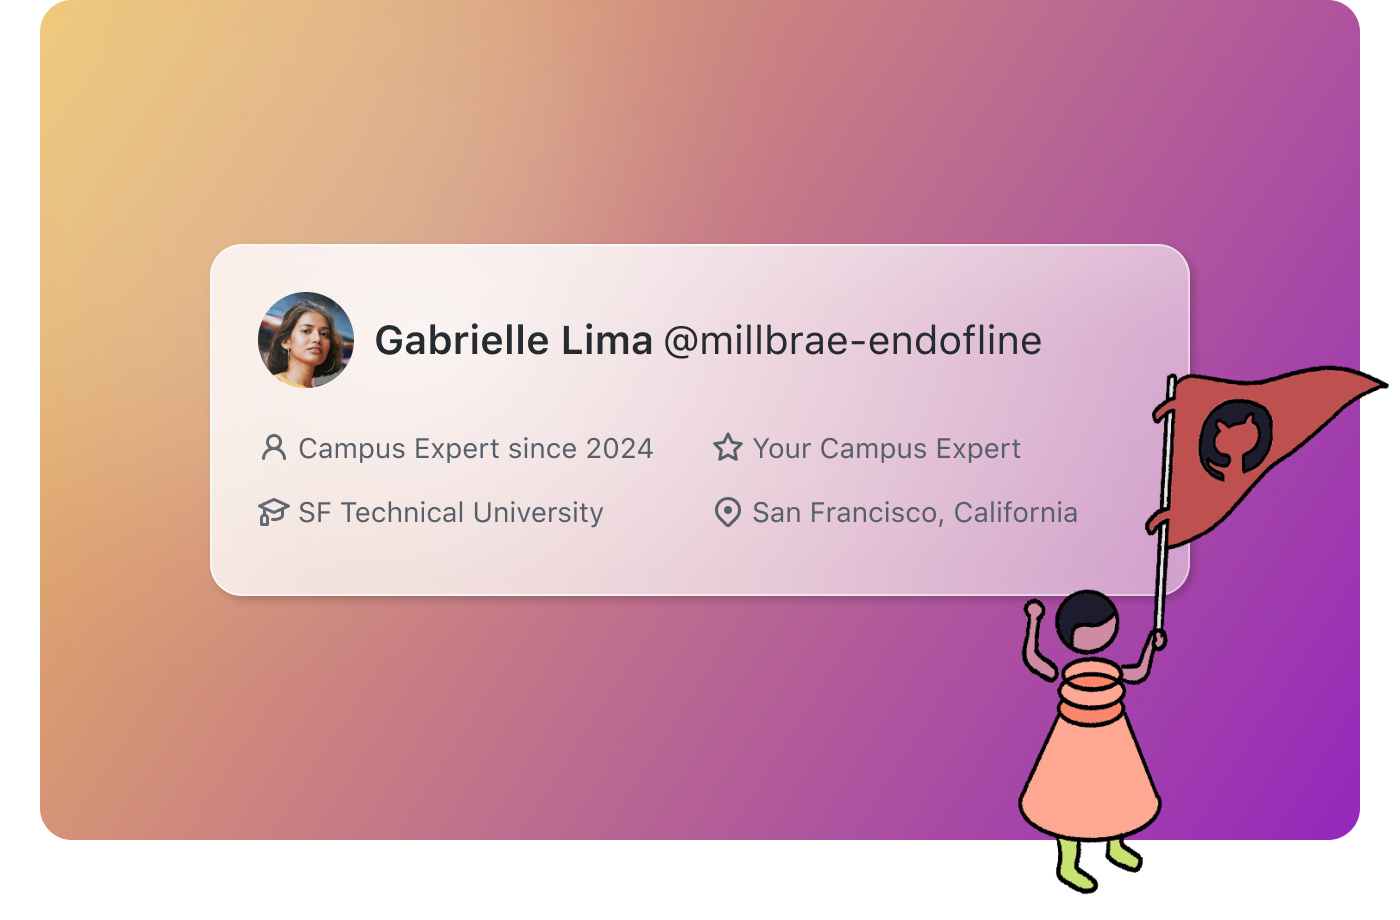 Popup displaying an avatar image for Gabrielle Lima and their handle